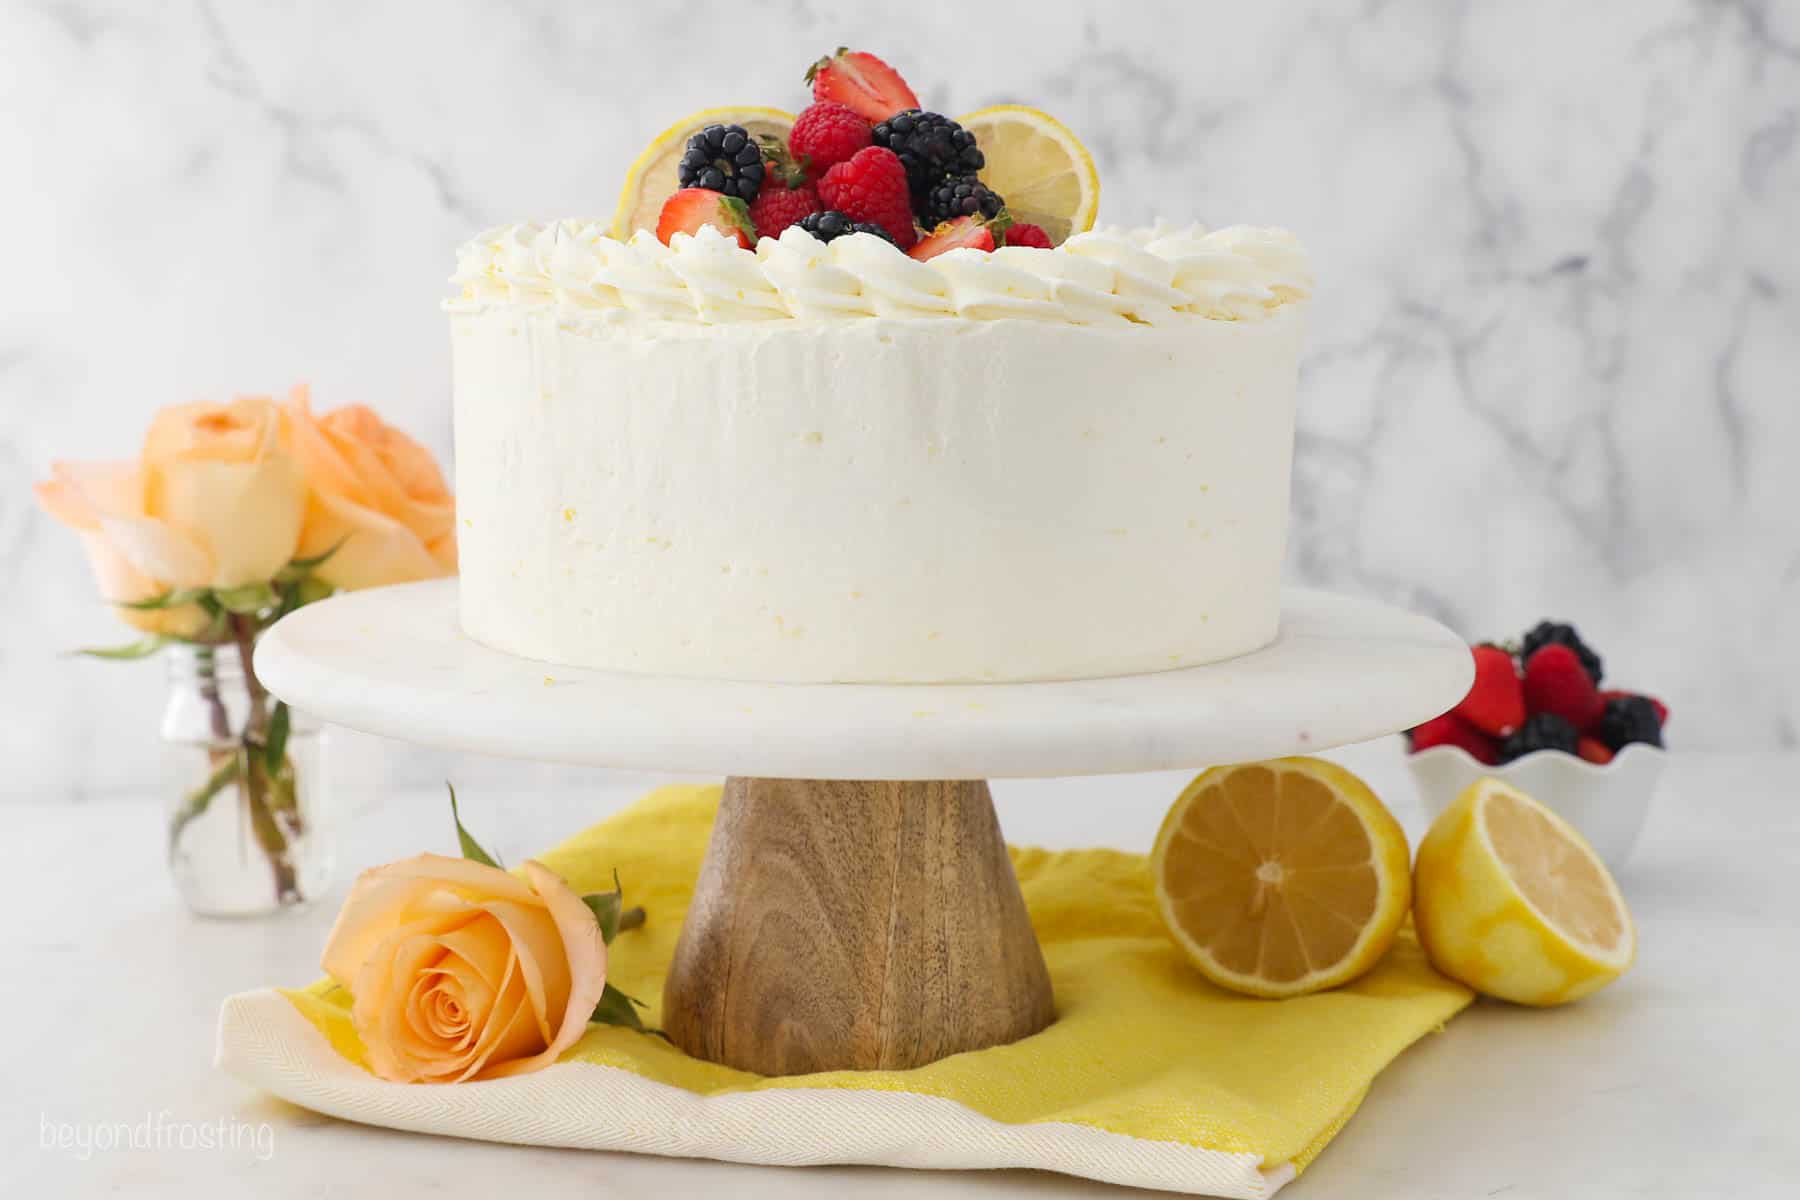 Decorated lemon layer cake with mascarpone frosting, topped with fresh fruit